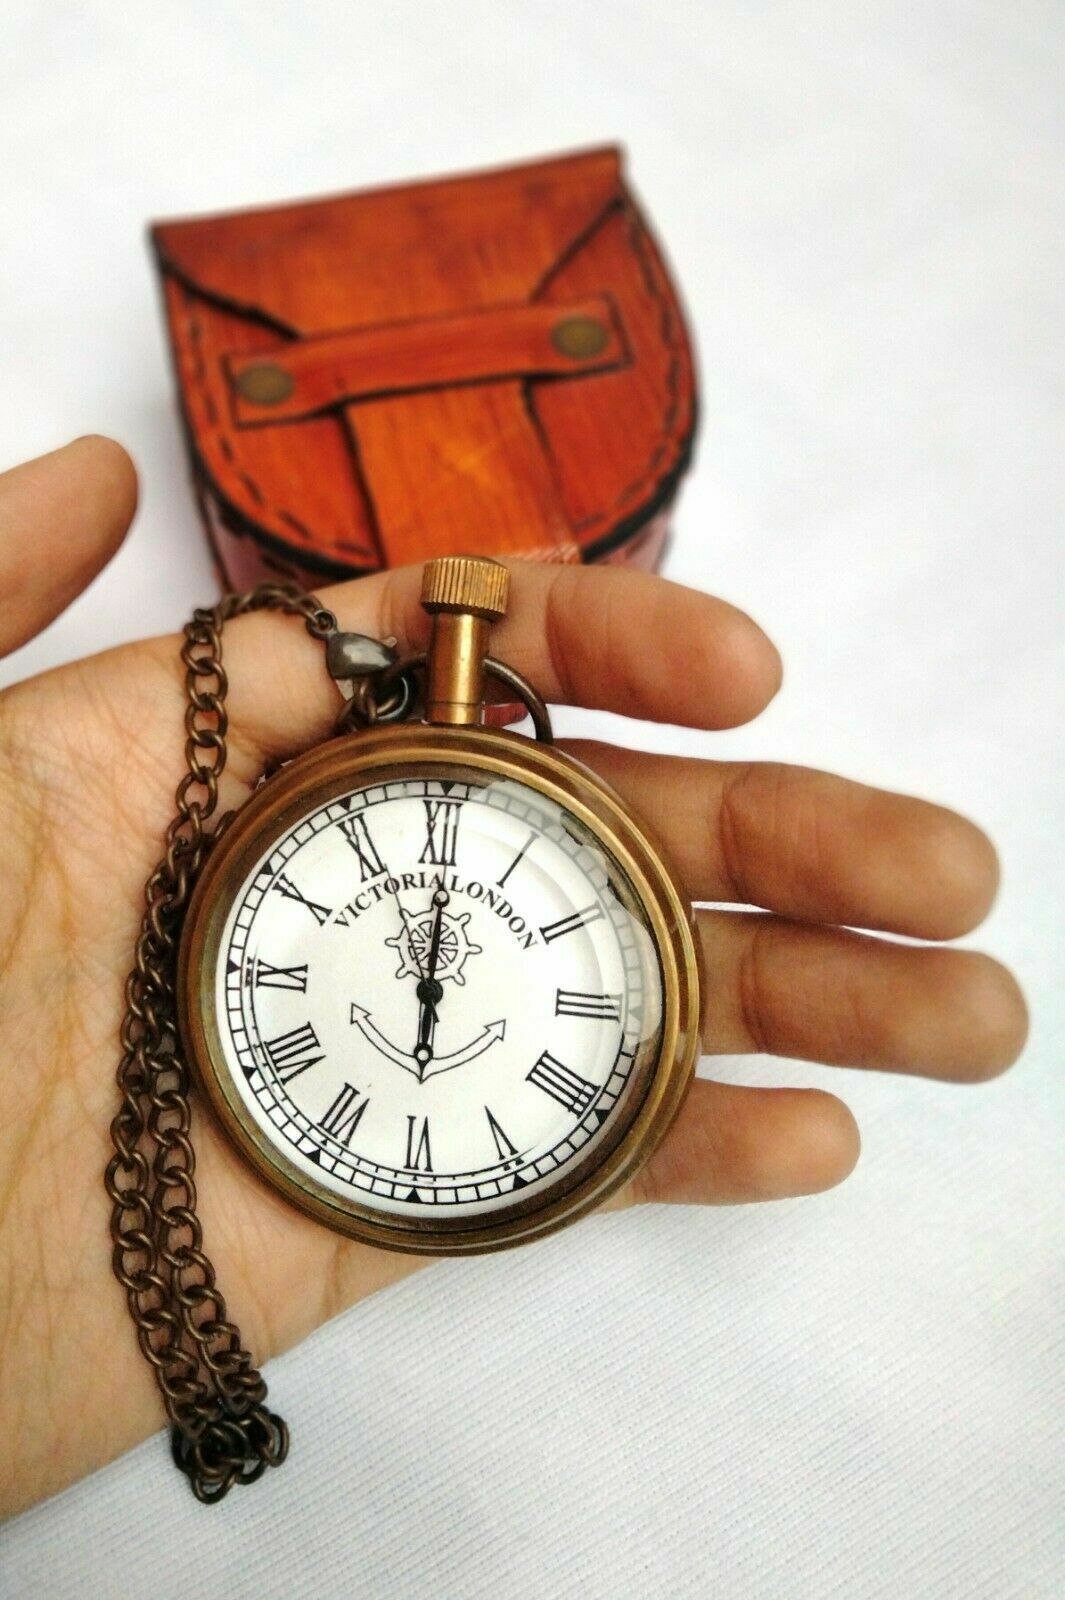 Antique Brass Pocket Watch With Chain or leather case